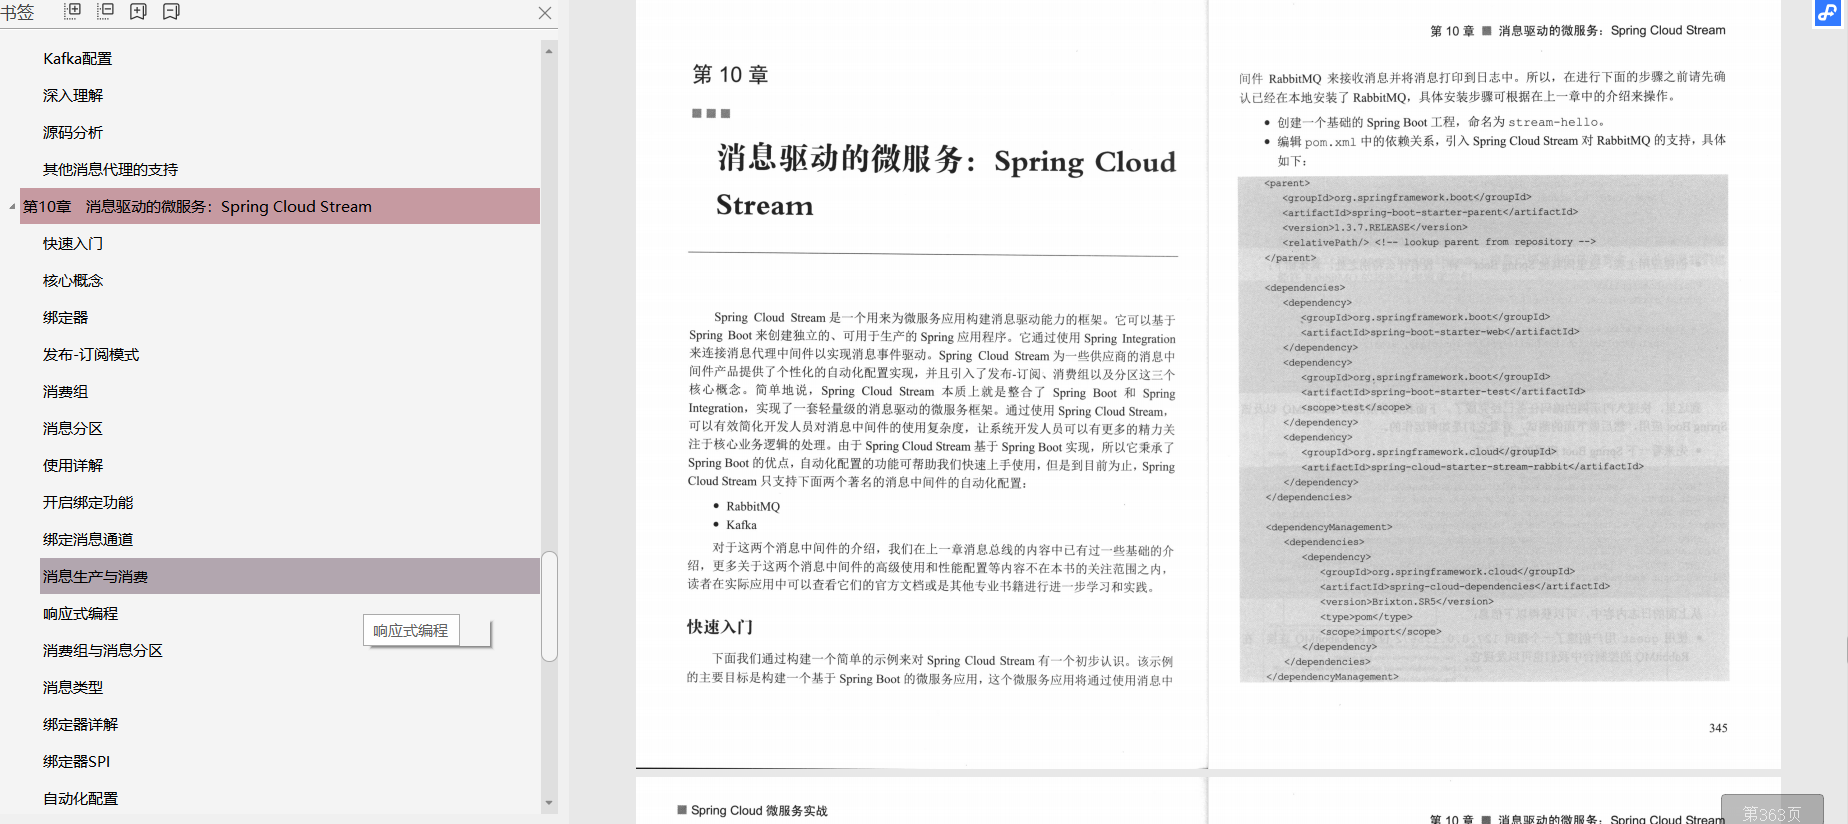 Love, love, Spring Cloud Alibaba internal microservice architecture notes are really amazing